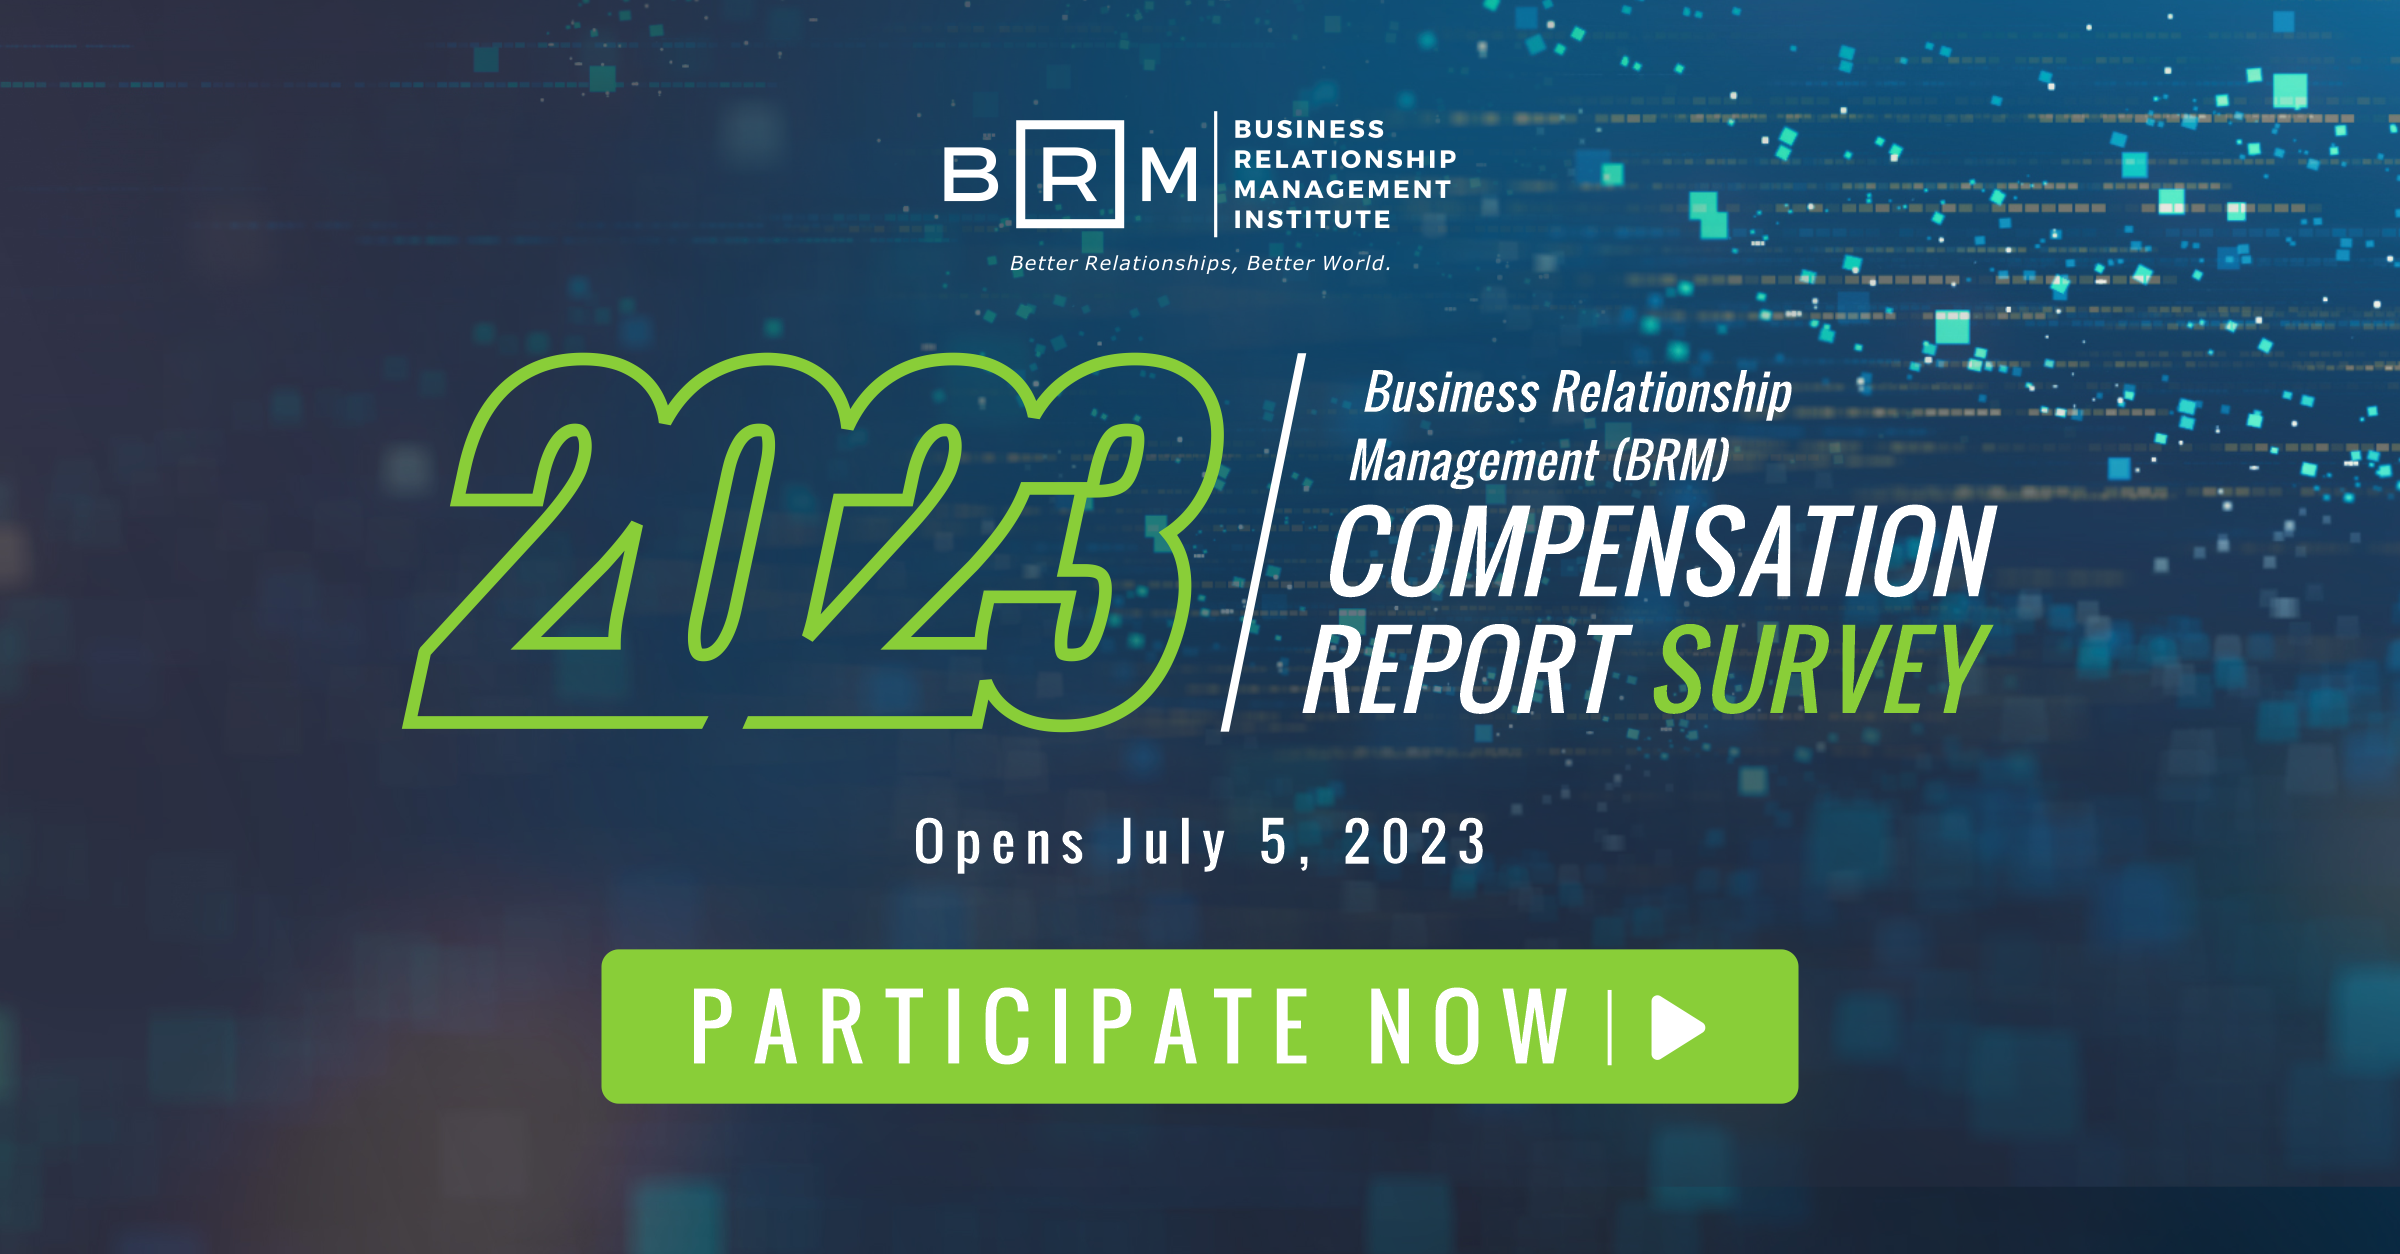 The 2023 BRM Compensation Report Survey is Now Open! BRM Institute